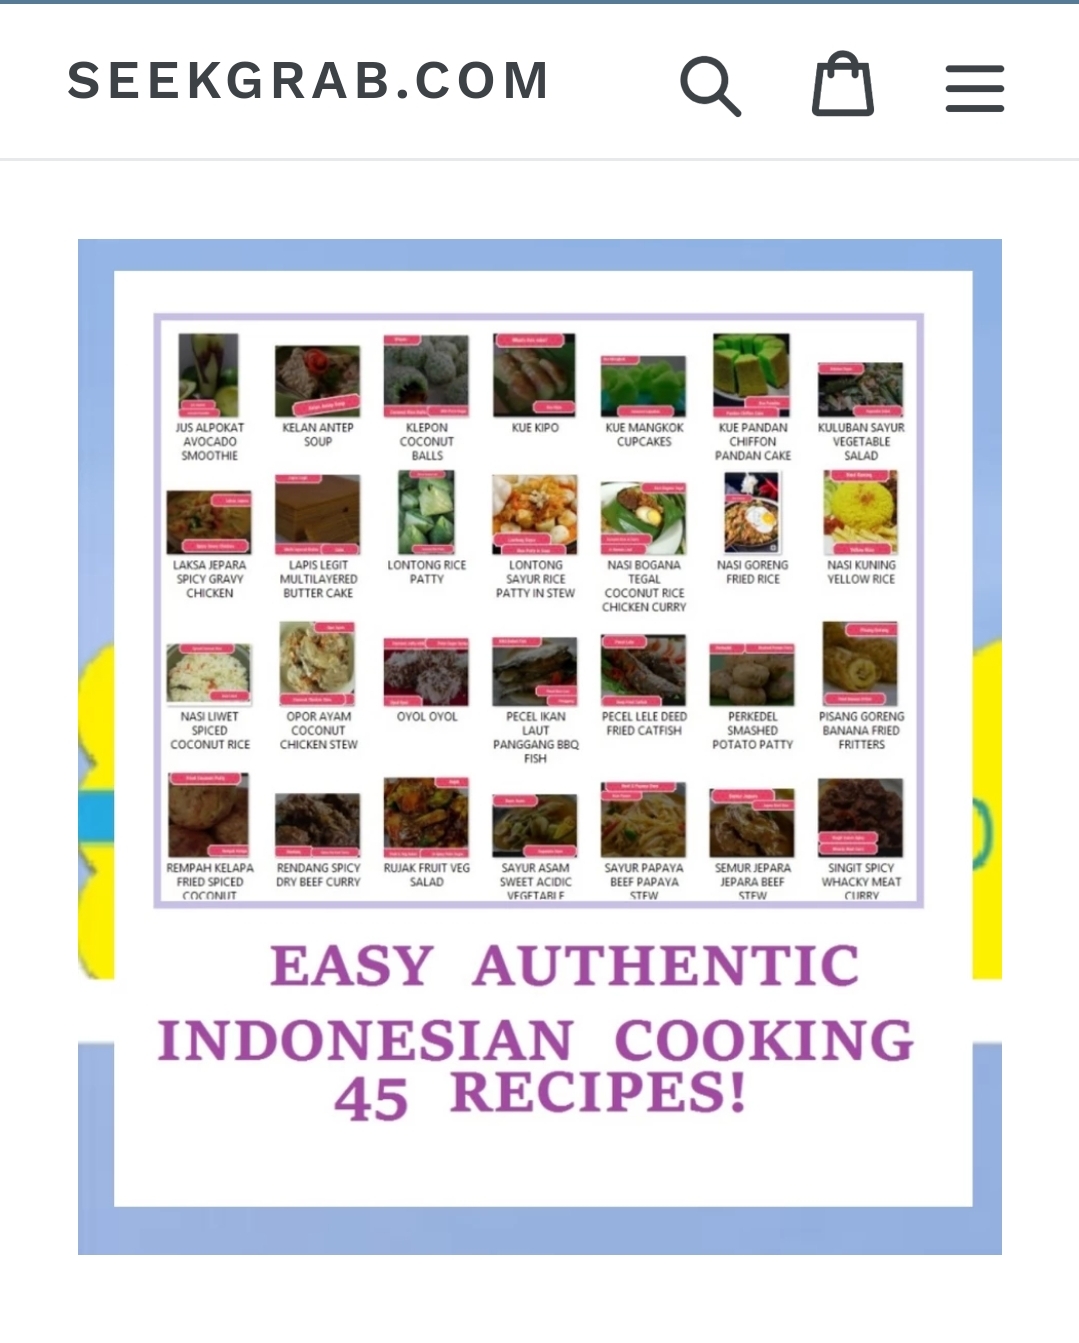 Do you love Asian food? Indonesian Cooking Secrets, 45 Recipes, request your download here.